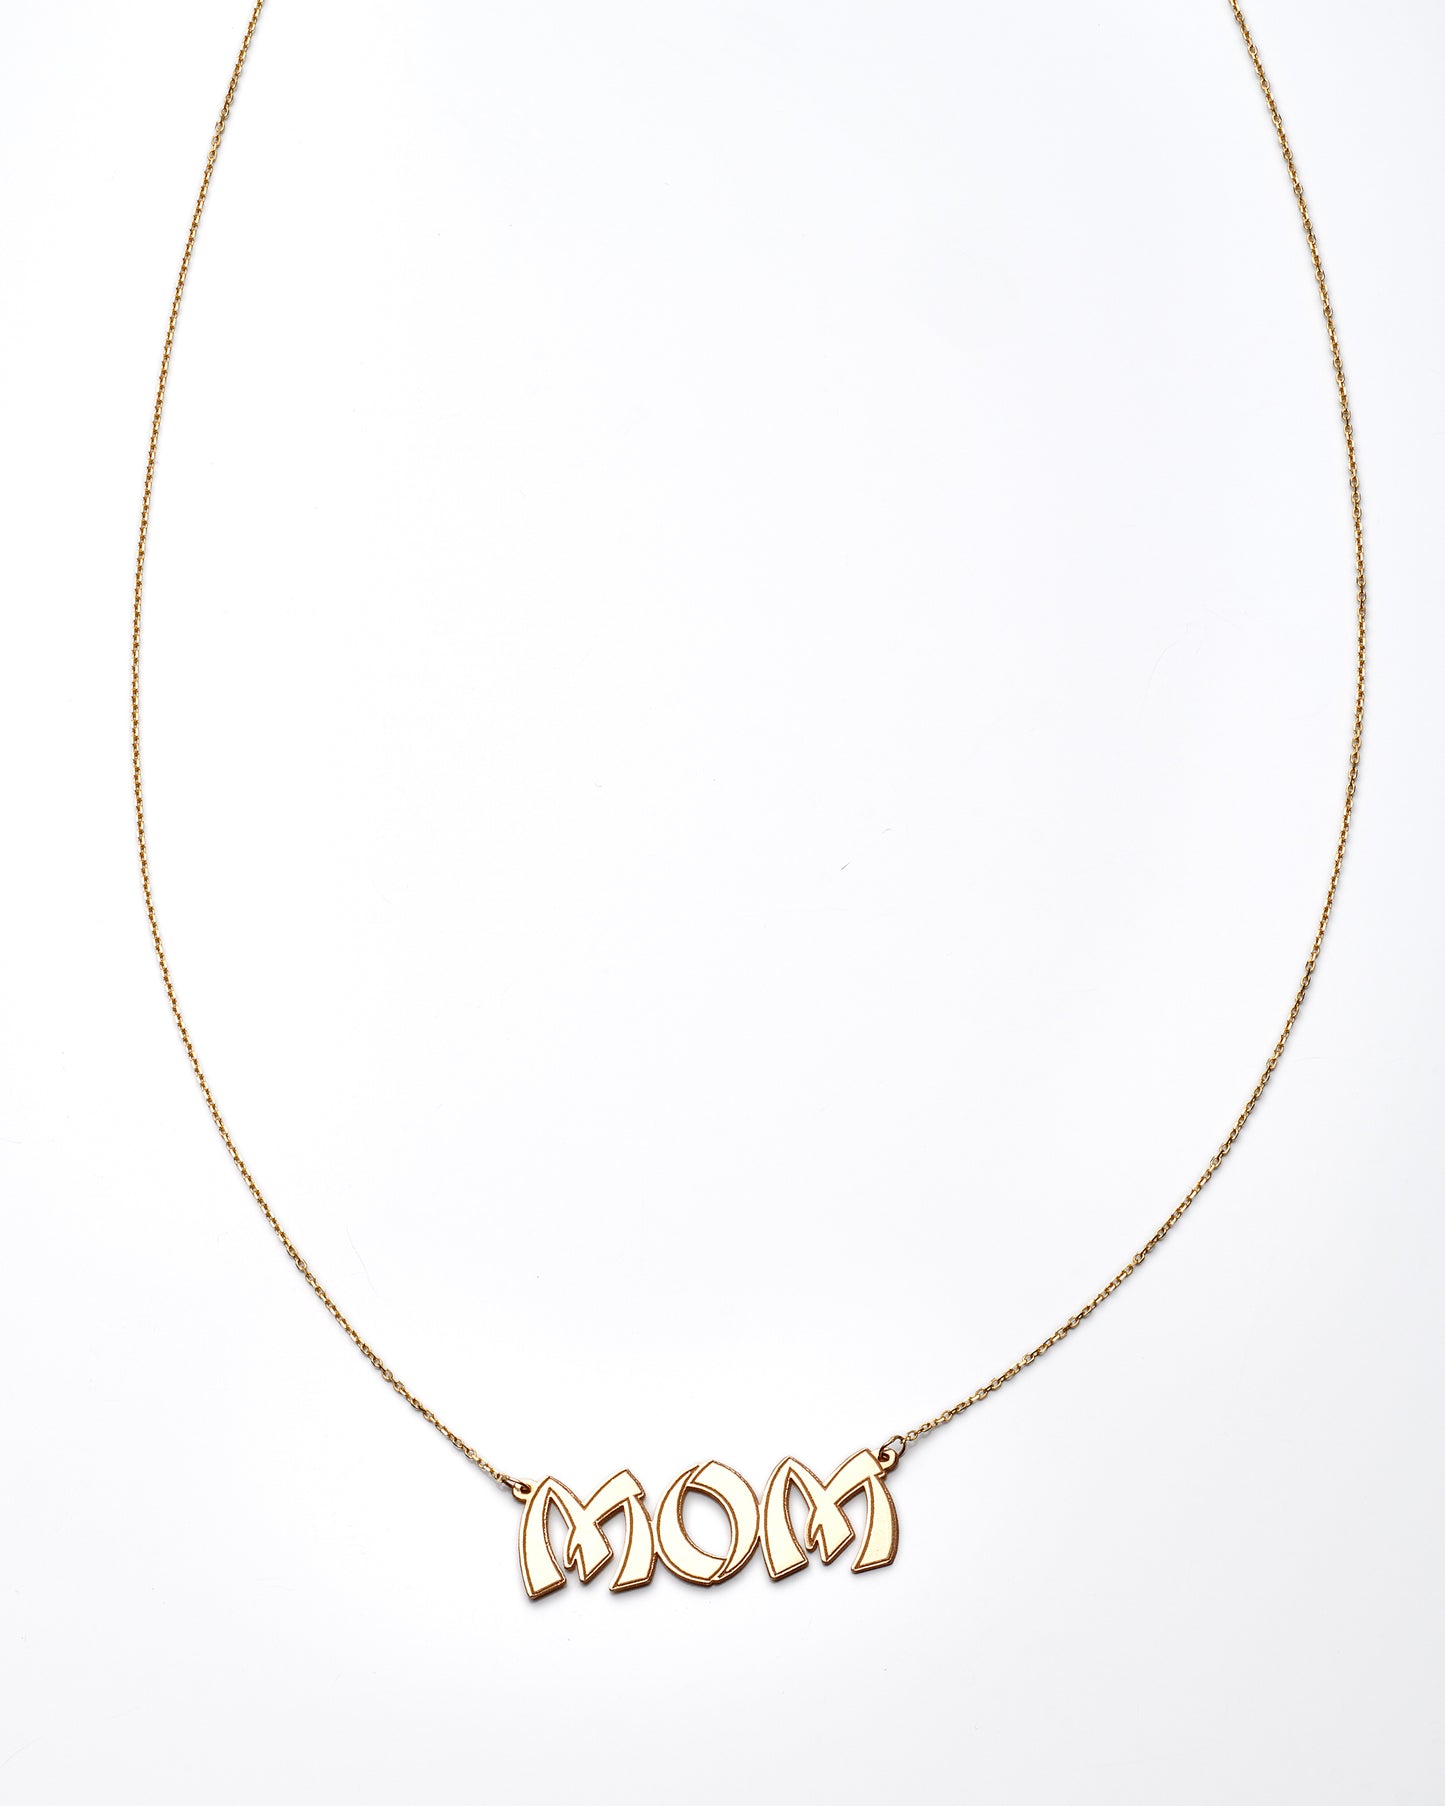 14K Yellow Gold "Mom" Name Plate Necklace 18In 1.0Dwt